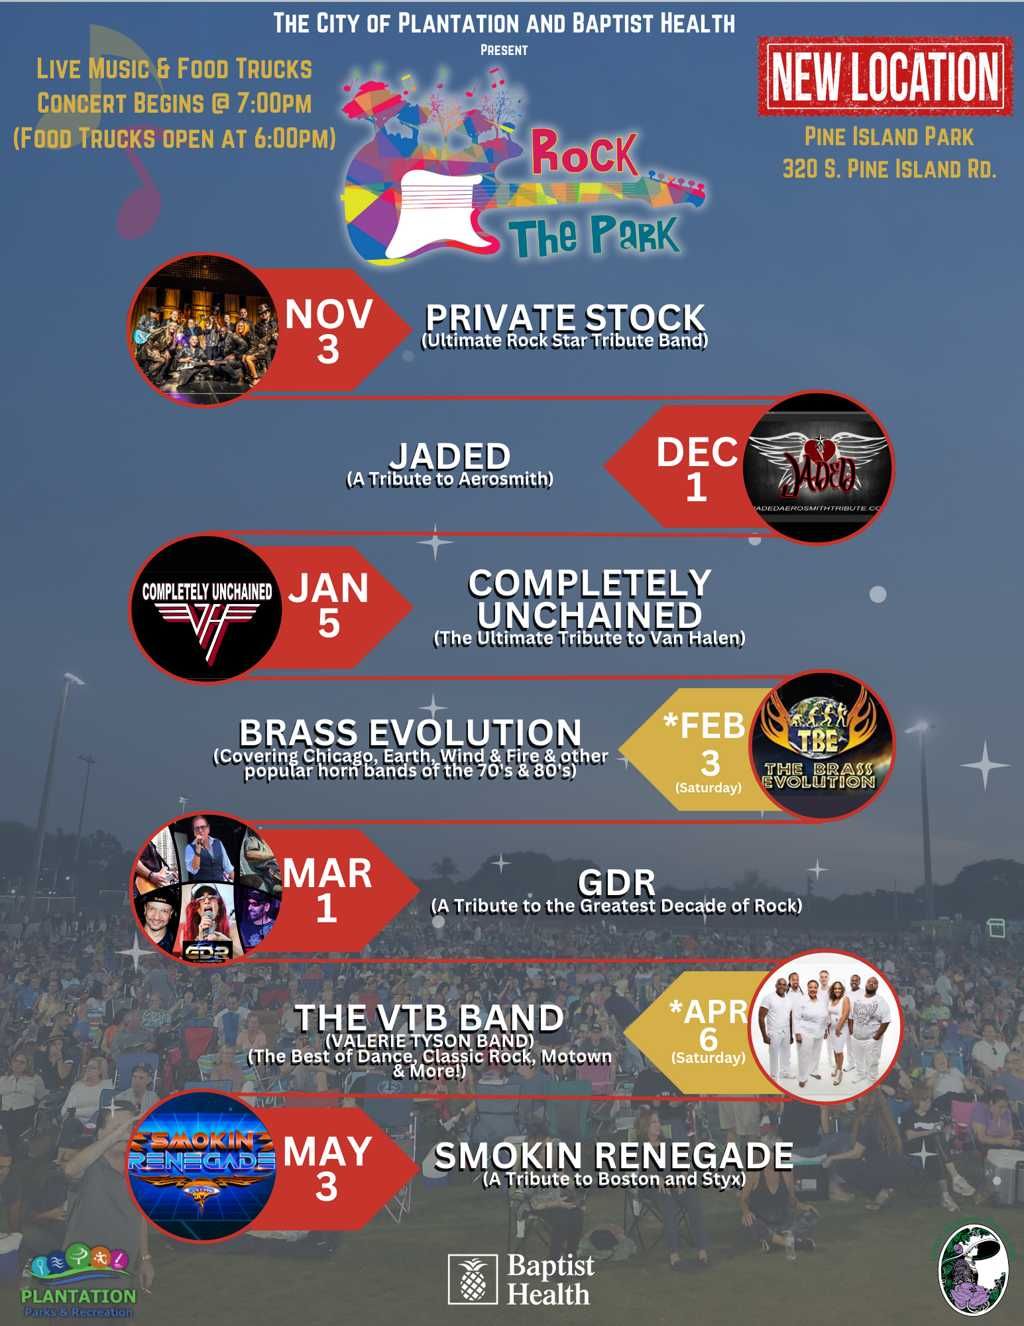 Rock the Park - Friday (Concert)